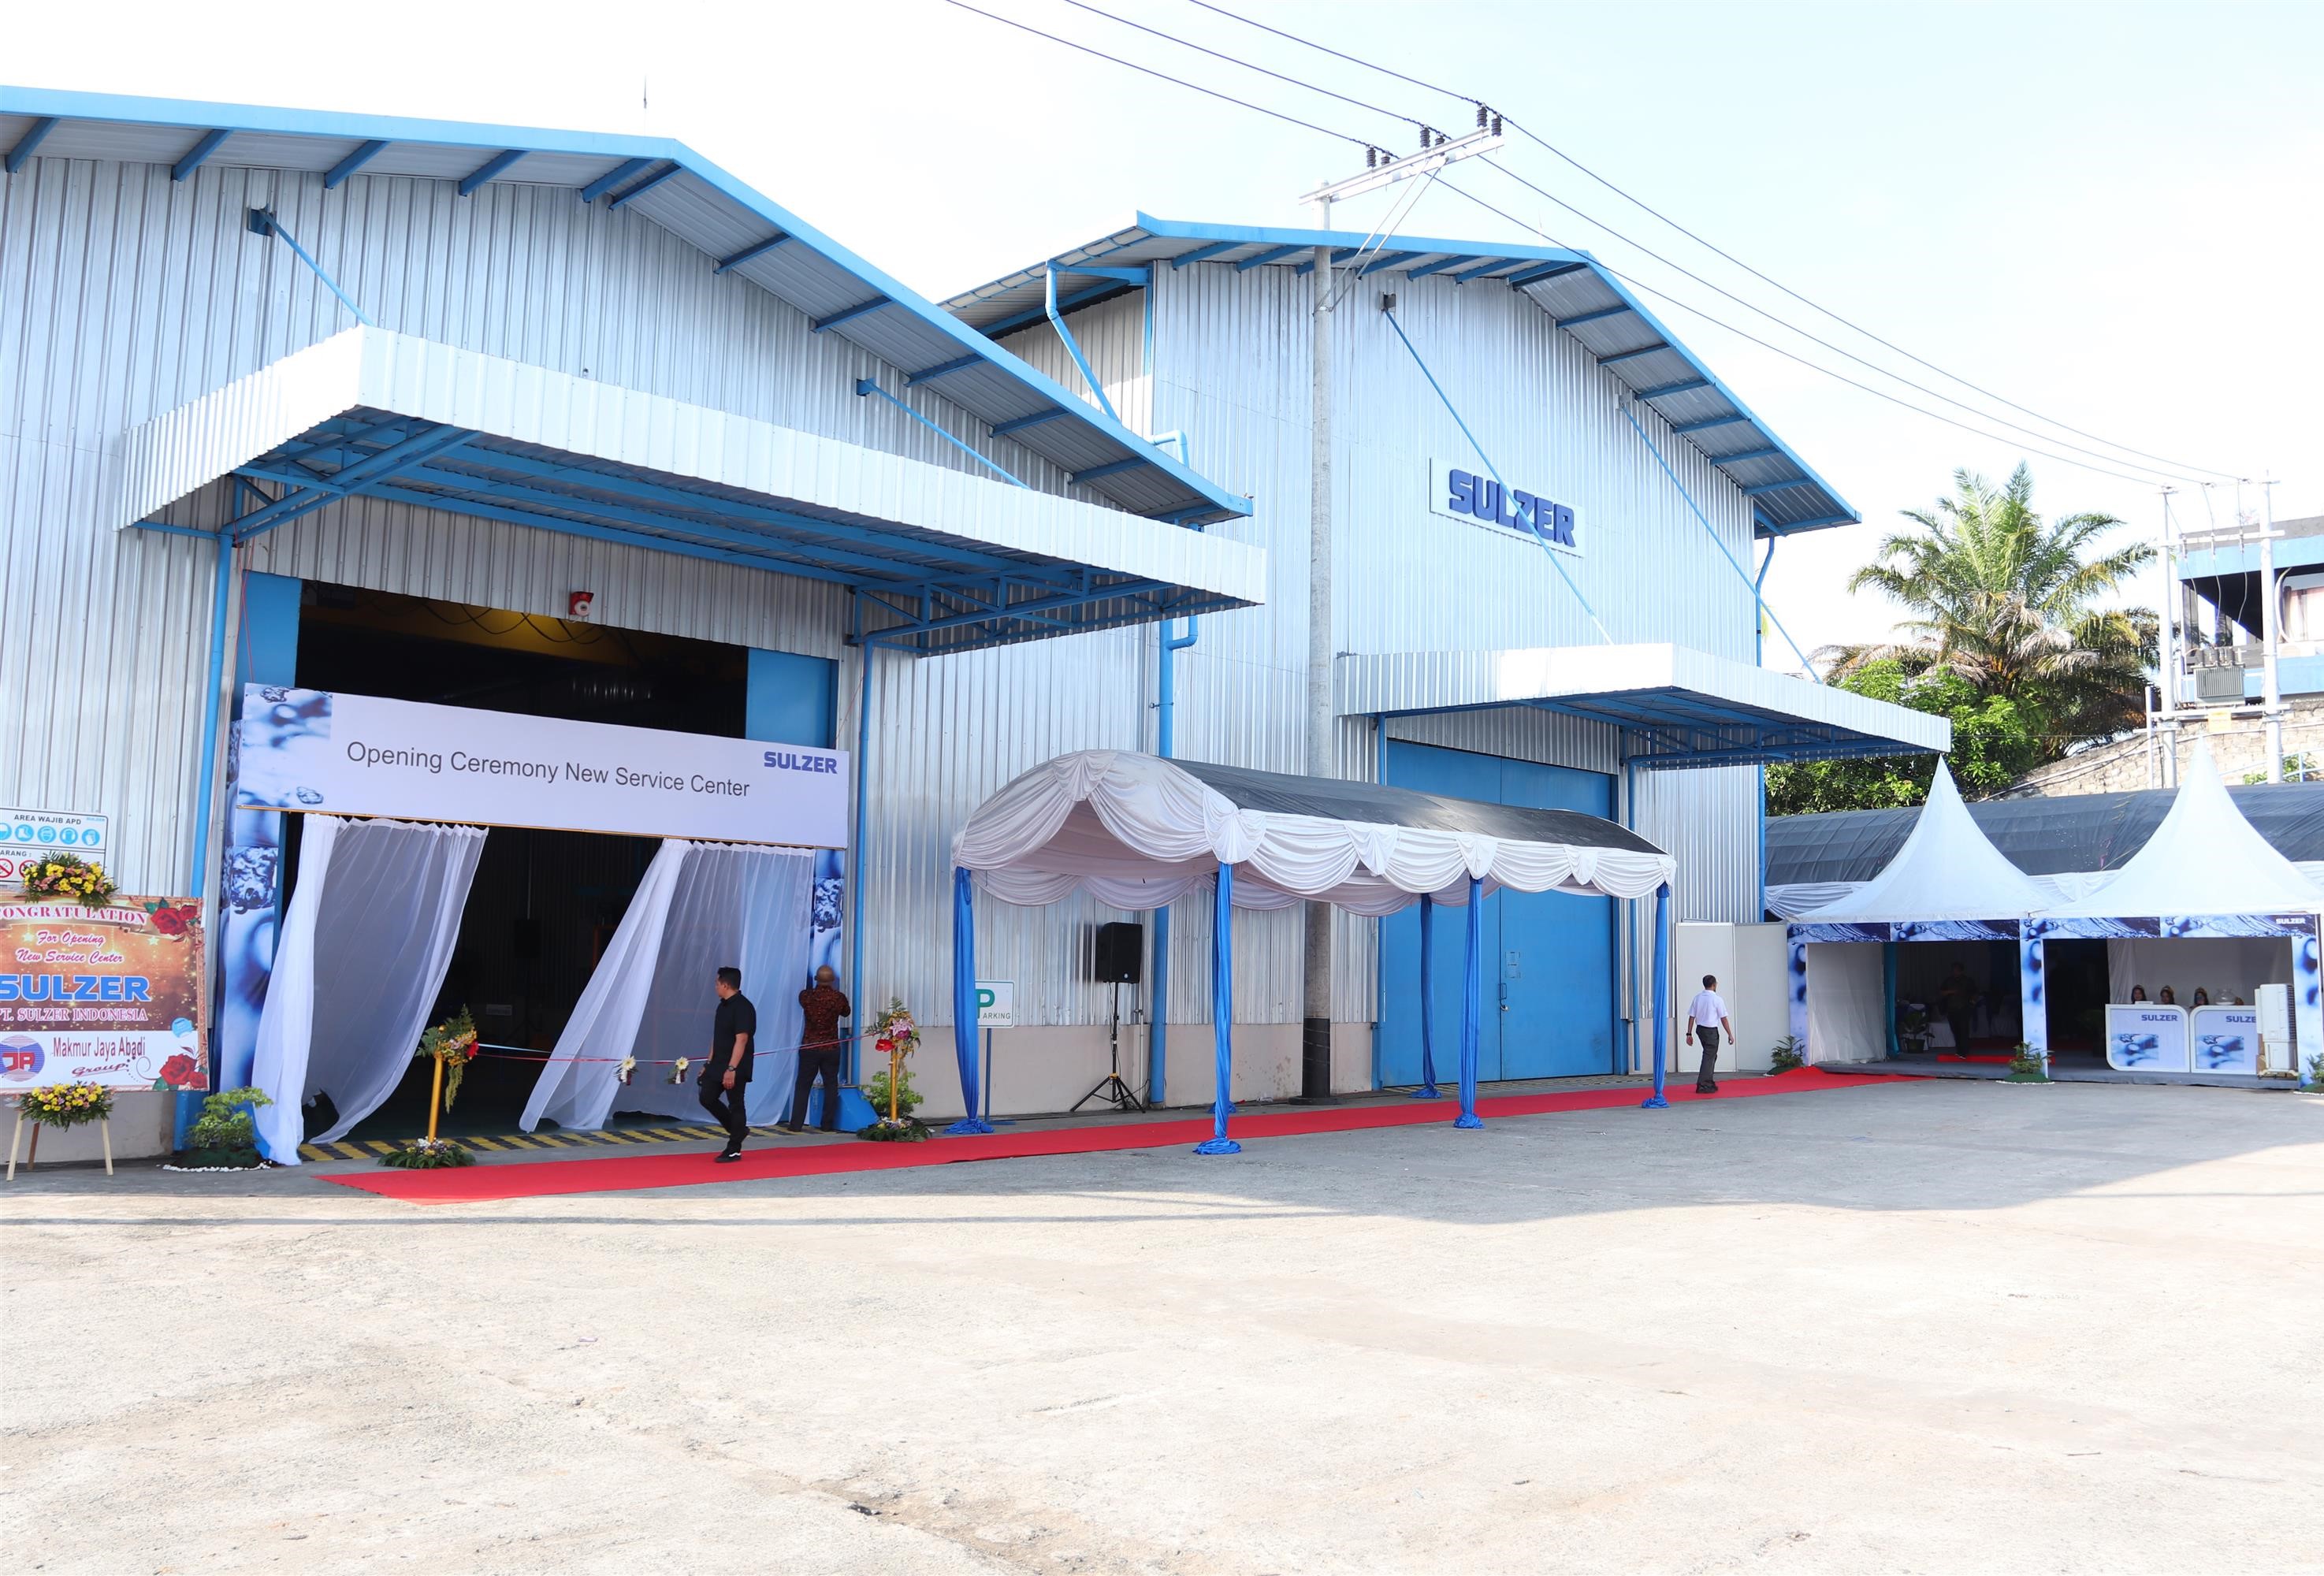 Putting the final touches to the opening ceremony for Sulzer's new service centre in Indonesia.